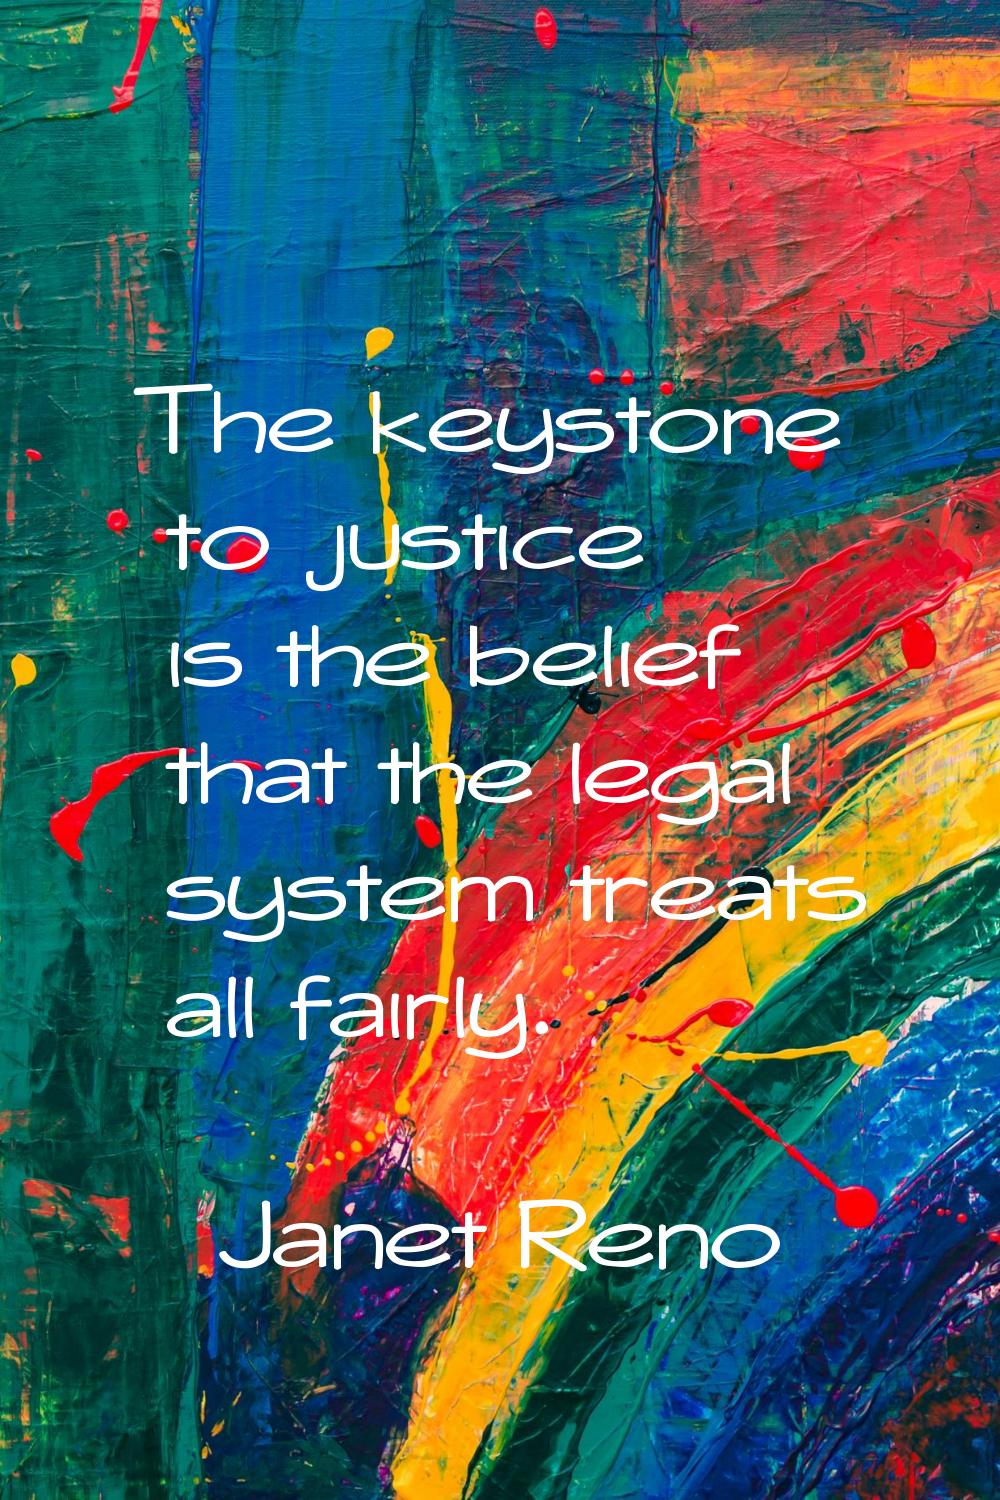 The keystone to justice is the belief that the legal system treats all fairly.